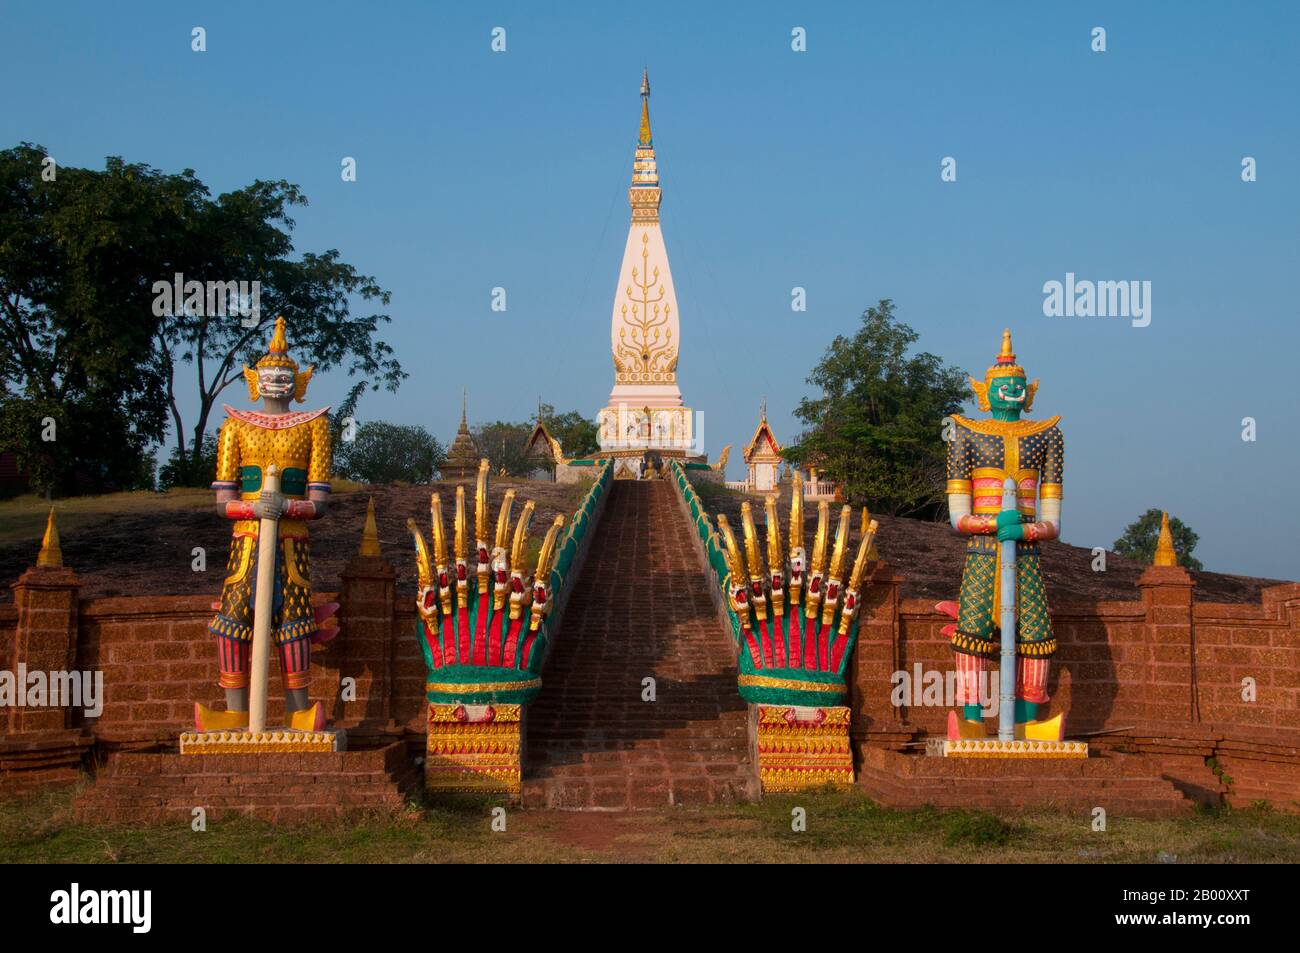 Thailand: Wat Phra That Satcha, Ban Tha Li, Loei Province, northeast Thailand.  Wat Phra That Satcha was built in 1976, one year after the collapse of Wat Phra That Phanom, the symbol of northeast Thailand and its most revered sanctuary. The chedi is similar in style to That Phanom. Stock Photo